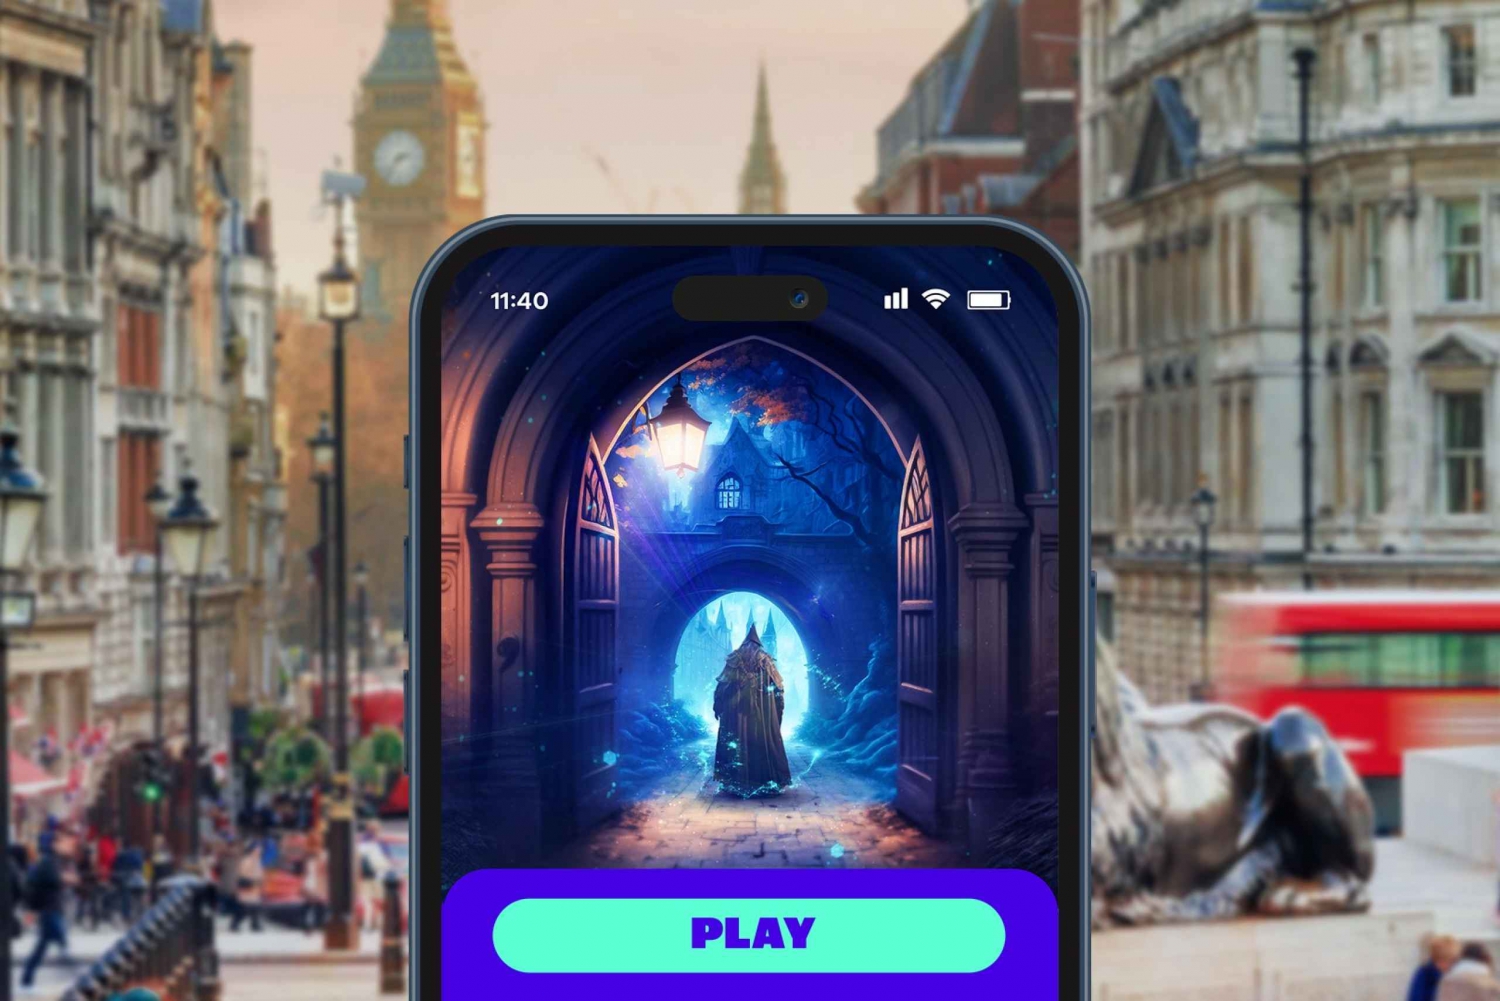 London Outdoor Escape Game: City of Wizards